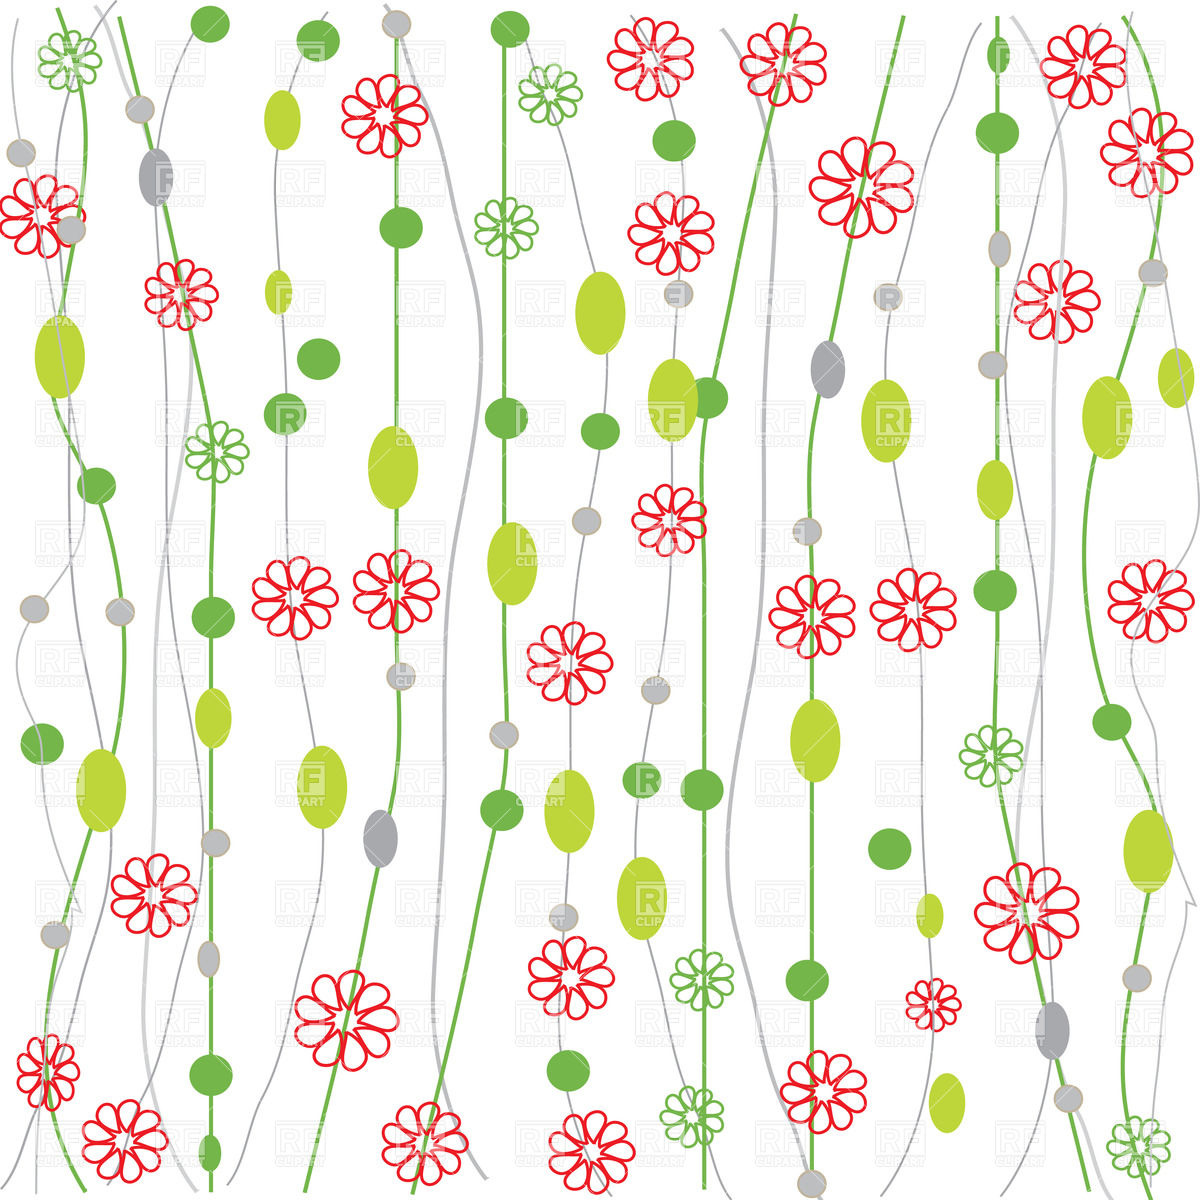 Floral Background Made Of Hand Drawn Twigs With Flowers And Leaves In